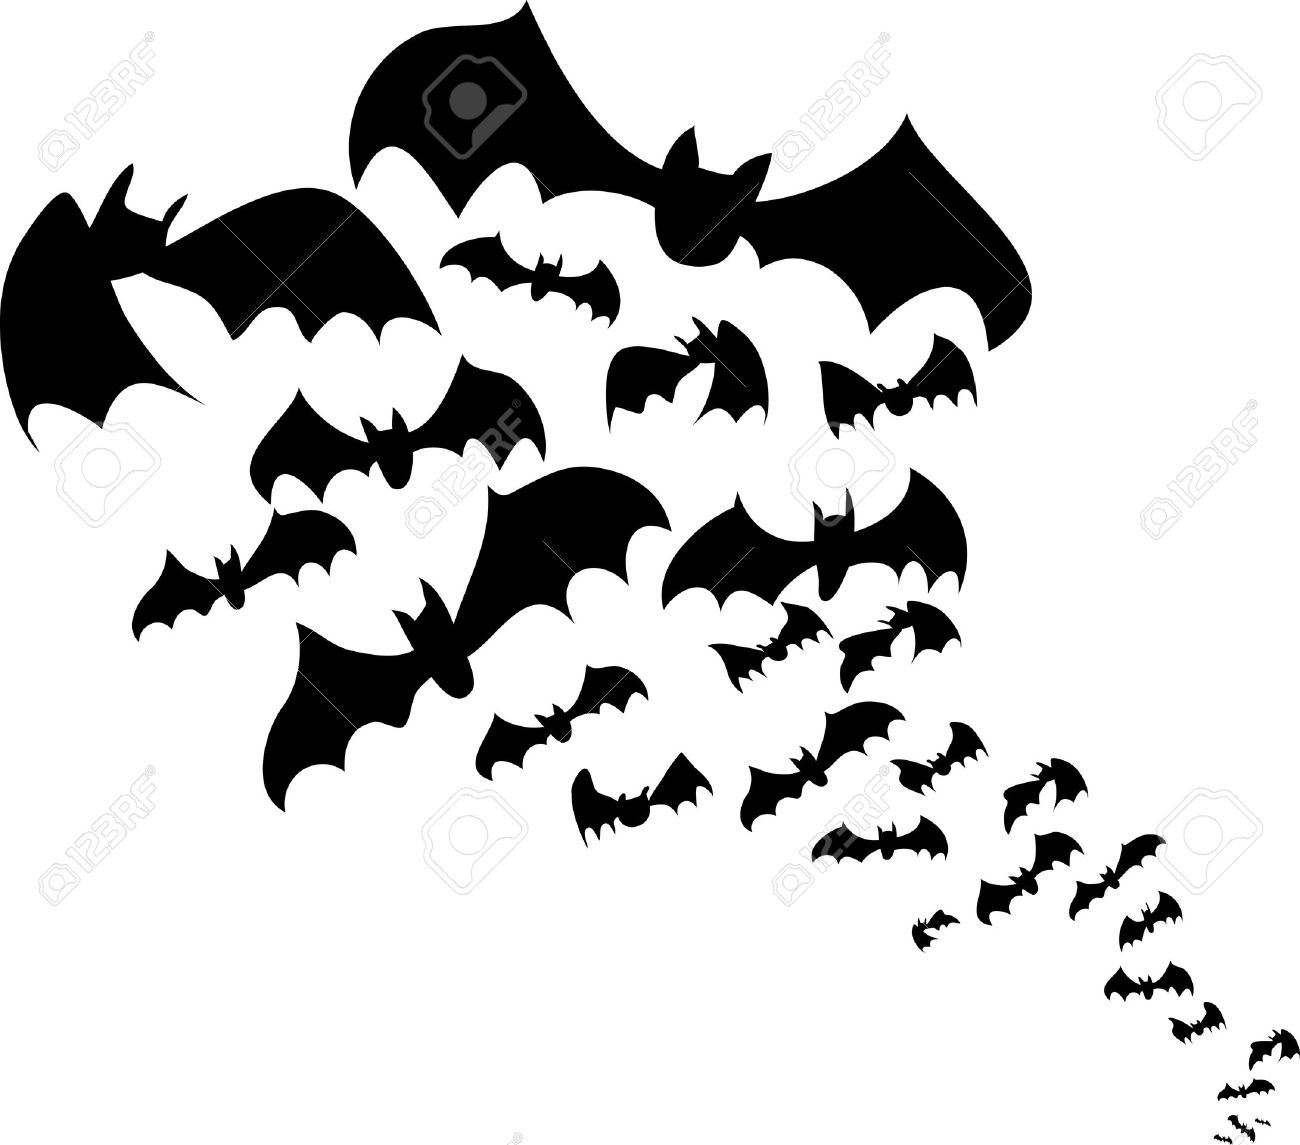 Flying bats flock black silhouettes for Halloween.